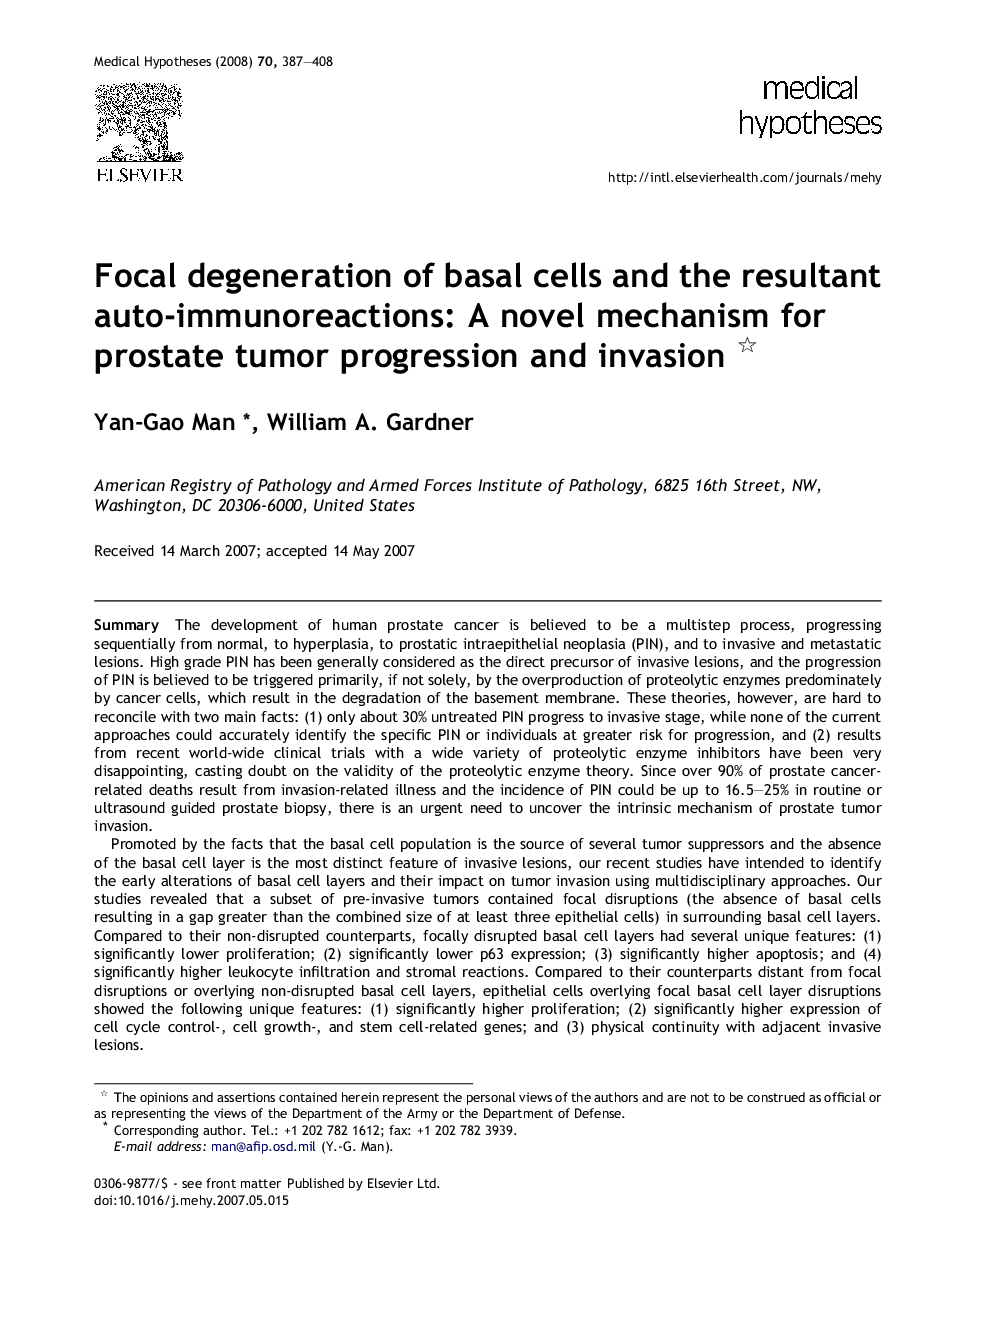 Focal degeneration of basal cells and the resultant auto-immunoreactions: A novel mechanism for prostate tumor progression and invasion 